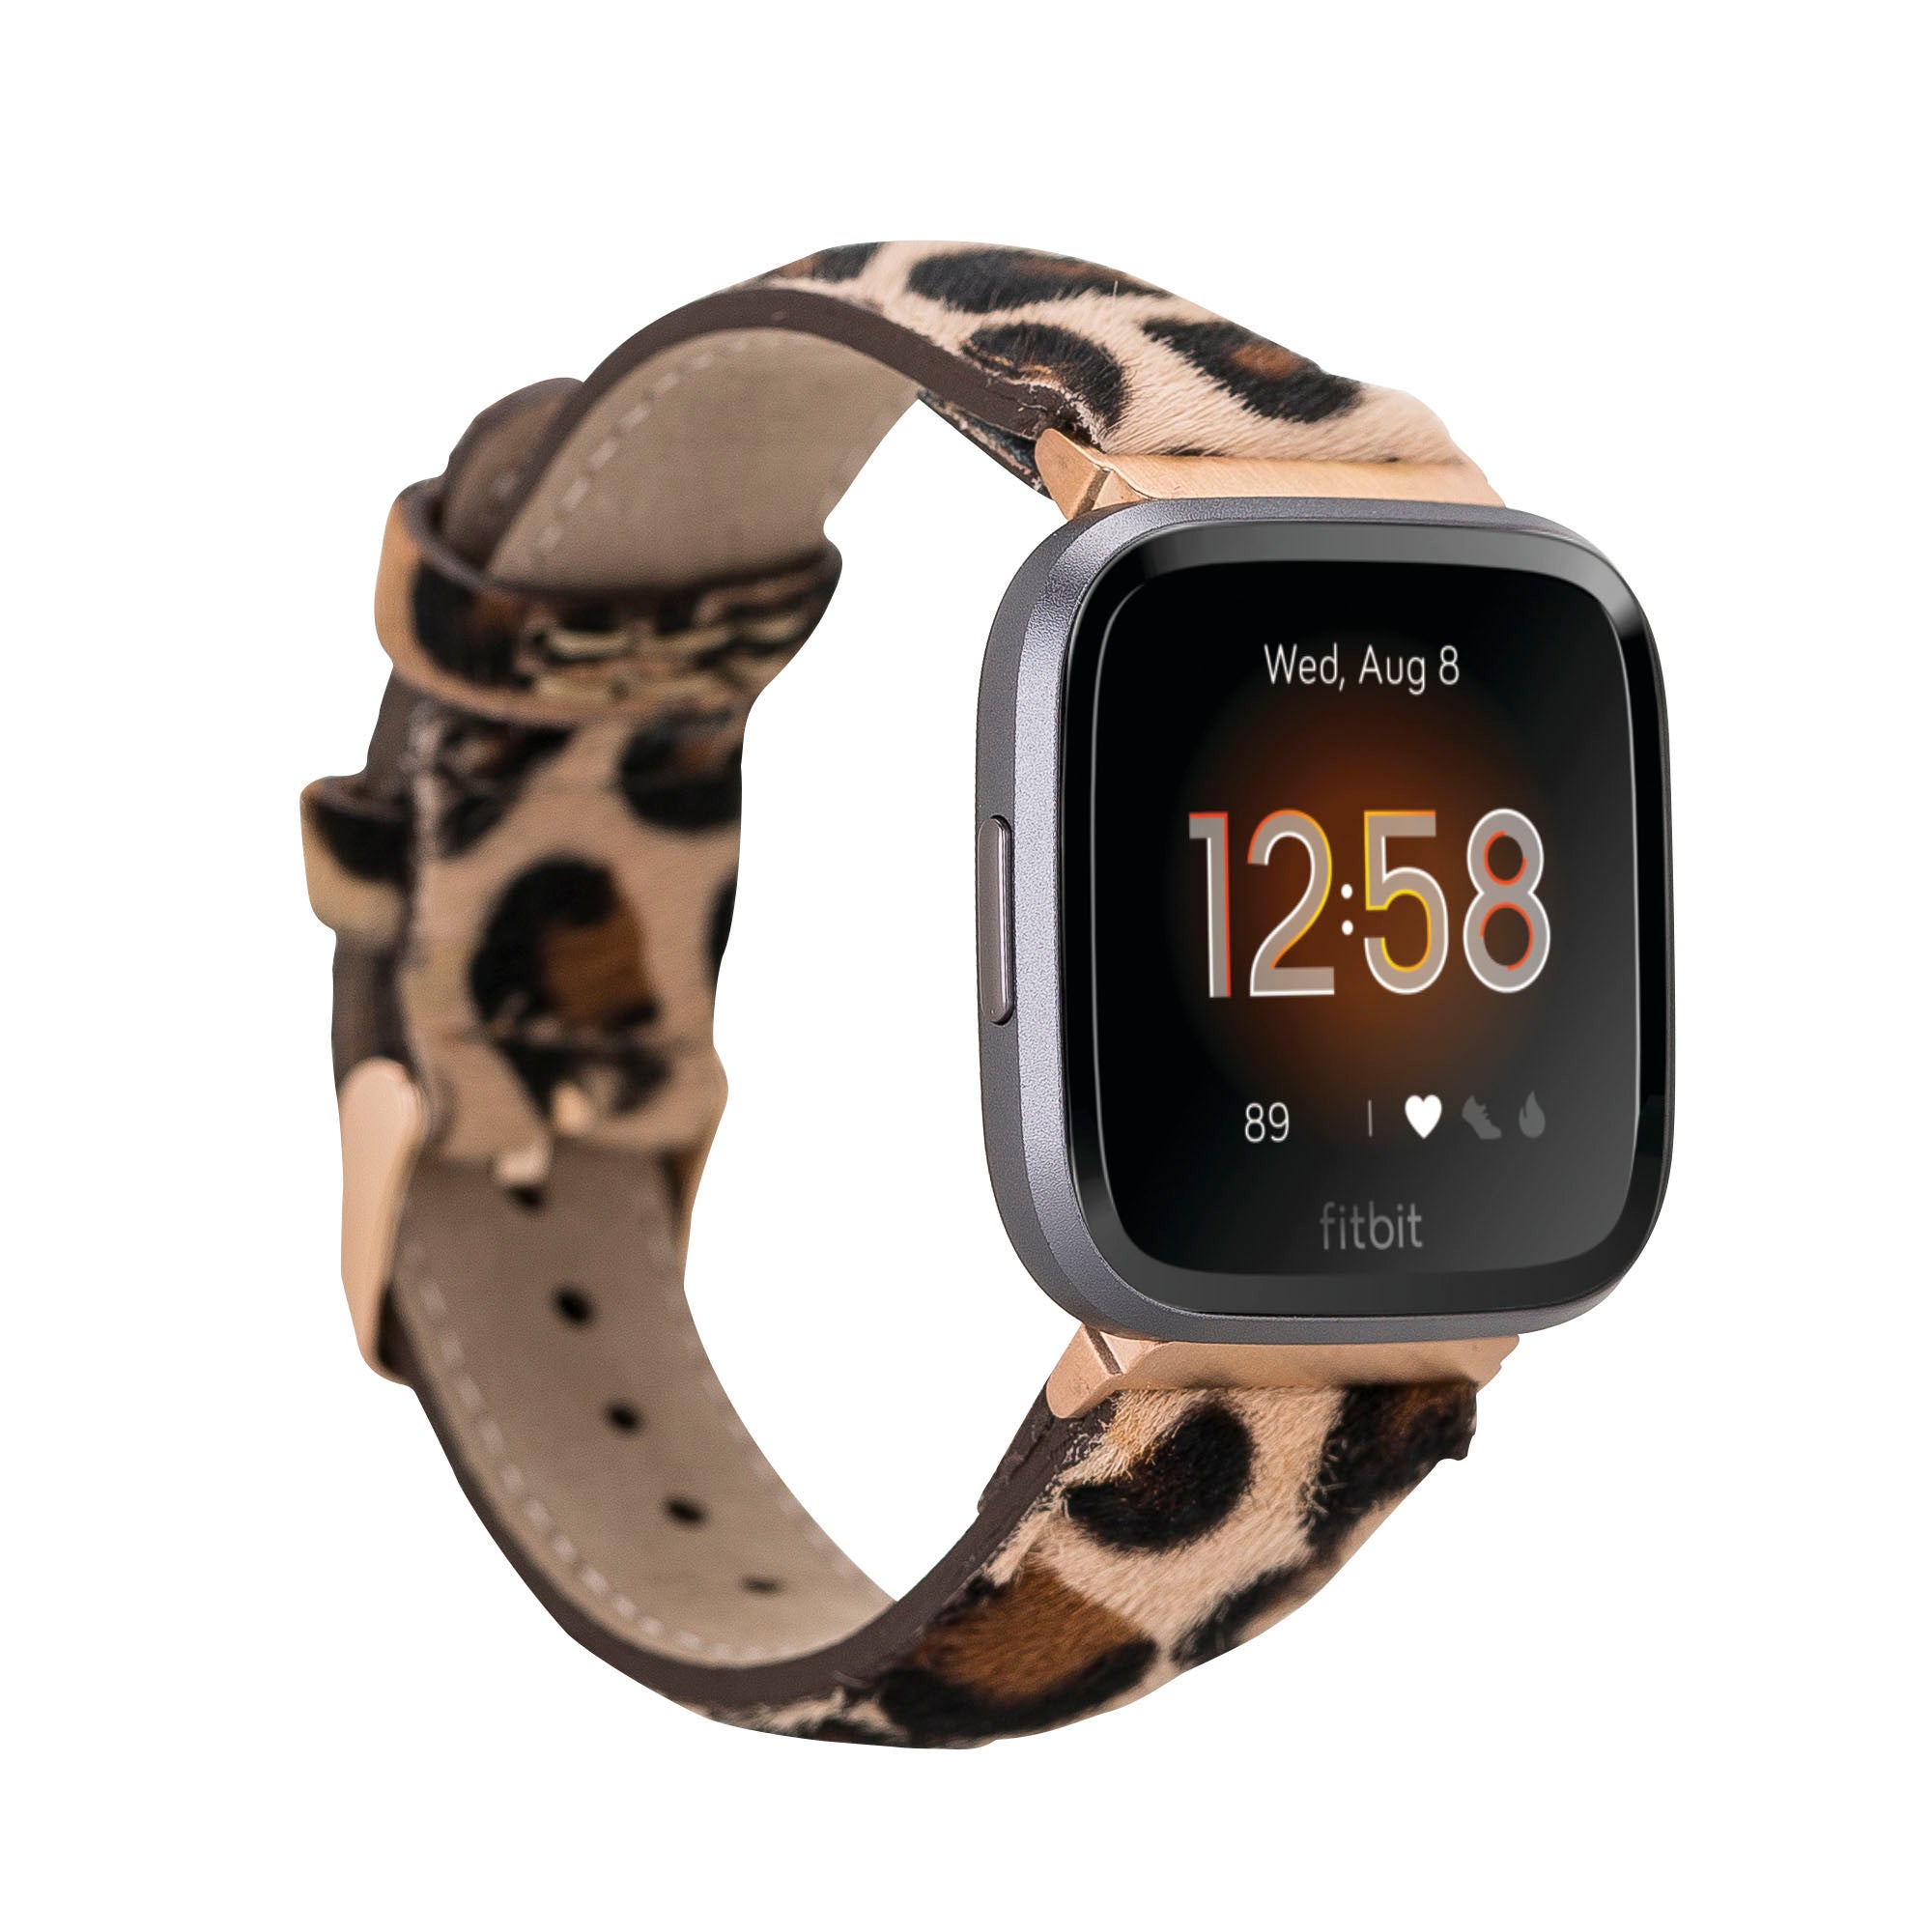 Full Grain Leather Band for Fitbit Versa 3 / Fitbit Sense / Fitbit Versa 2 / Fitbit Versa 1 / Fitbit Versa Lite - FURRY LEOPARD PATTERNED - saracleather